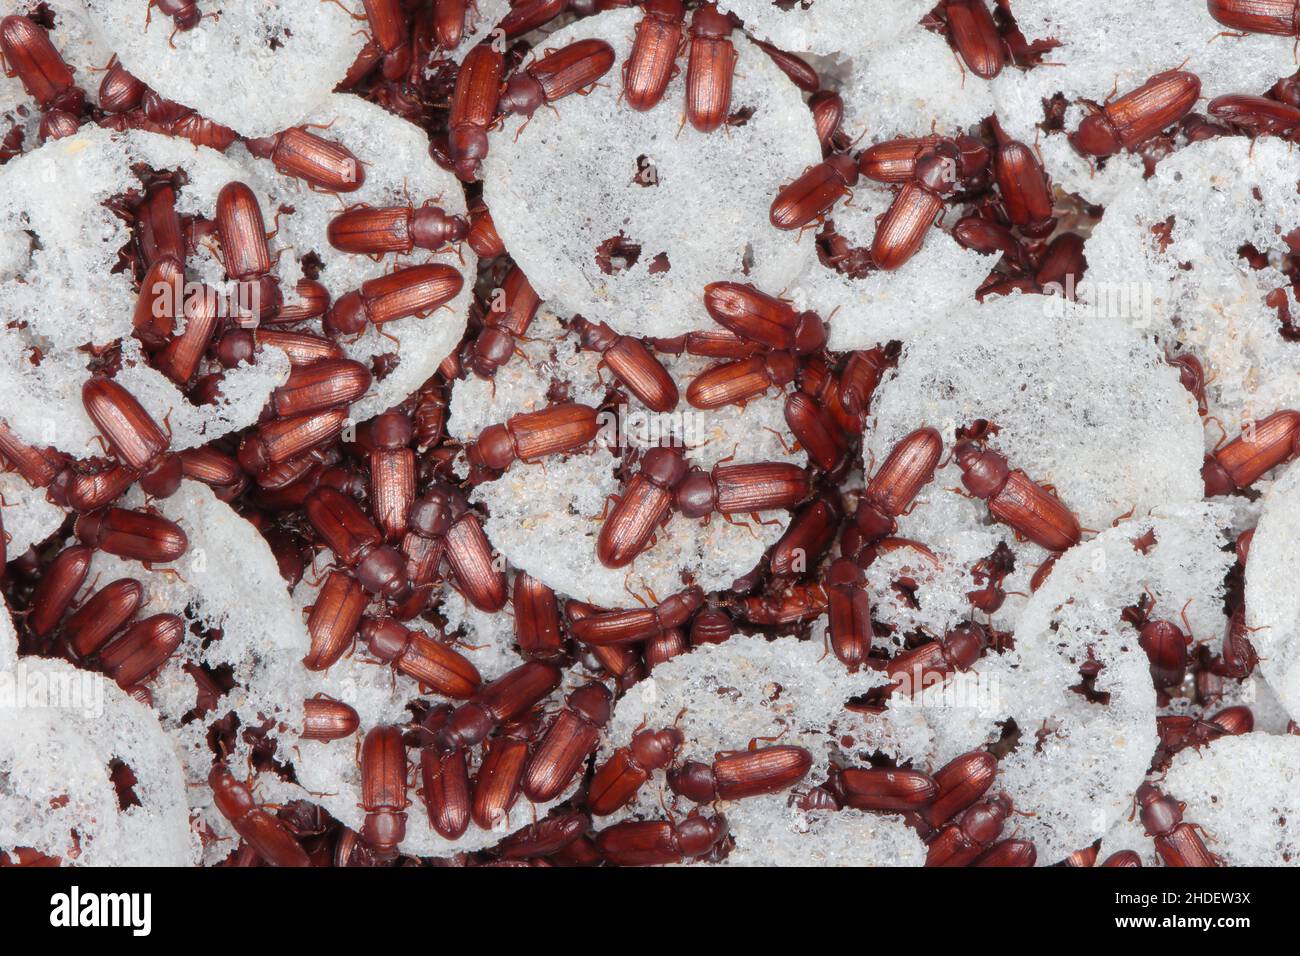 Beetles of confused flour beetle Tribolium confusum known as a flour beetle, a common pest of stored flour and grain Stock Photo